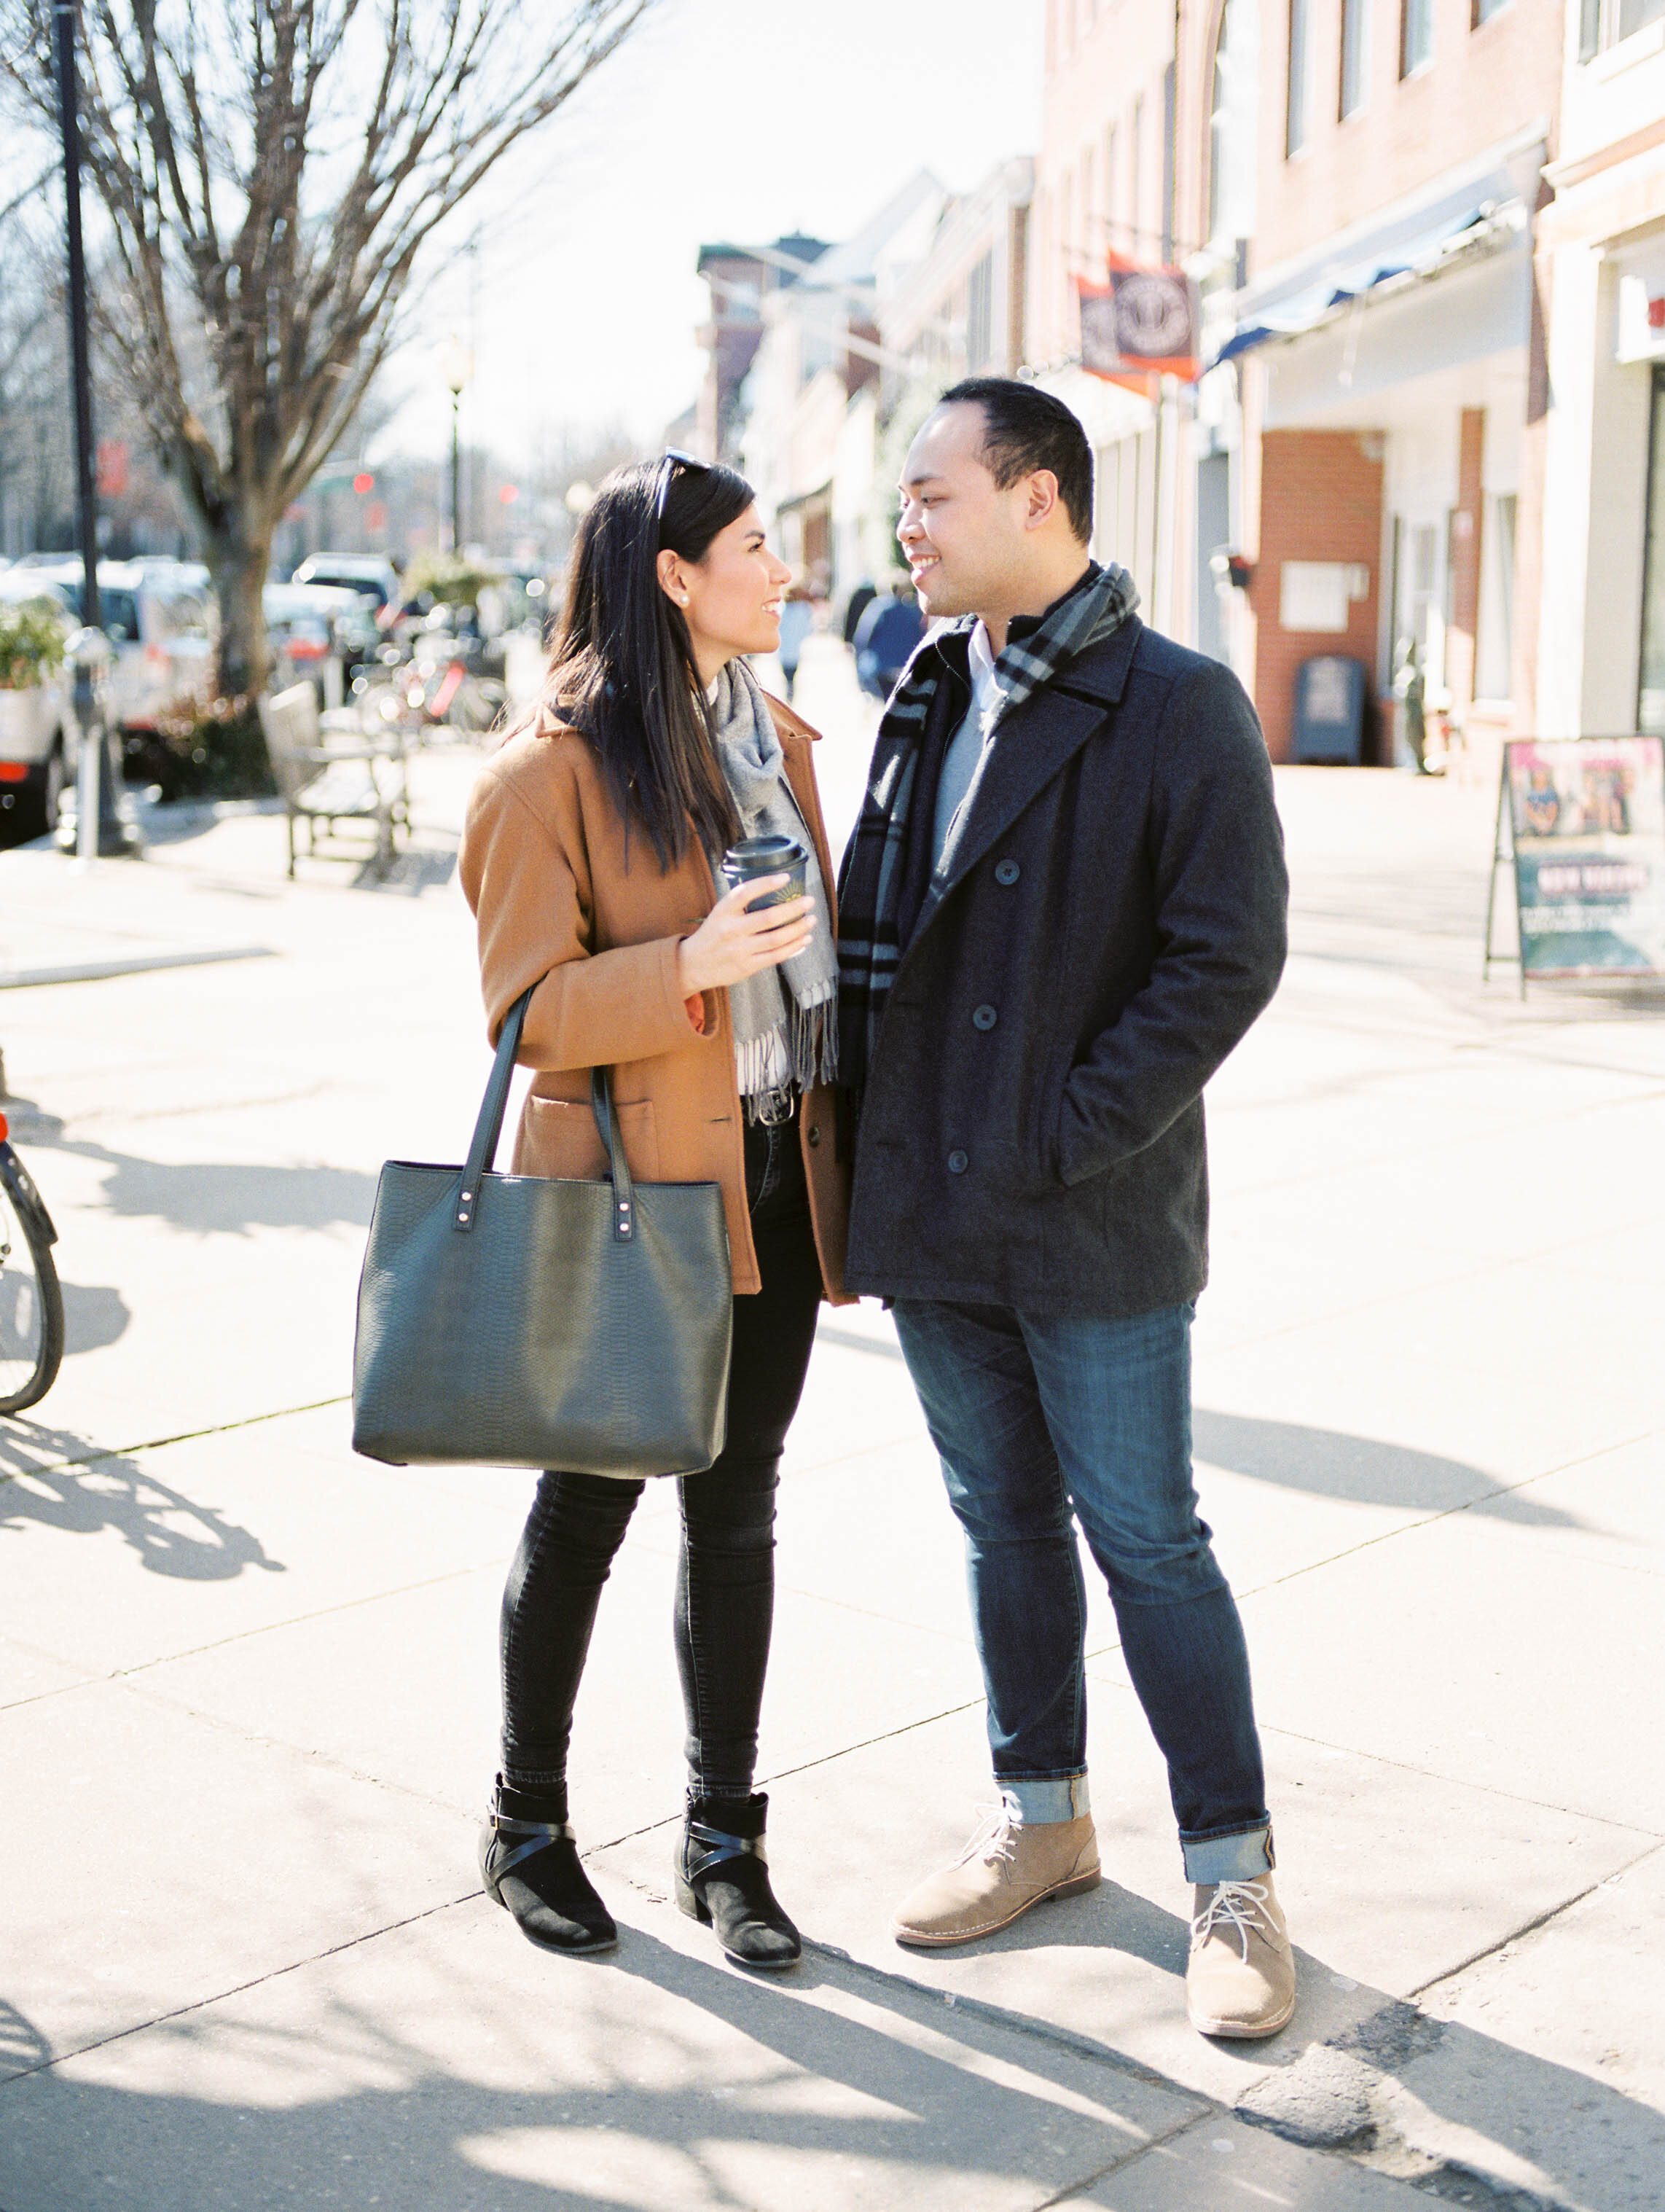 Outdoor lifestyle couples session with beige coat, sunglasses, coffee, shopping in Princeton New Jersey on Princeton University Campus by Liz Andolina Photography